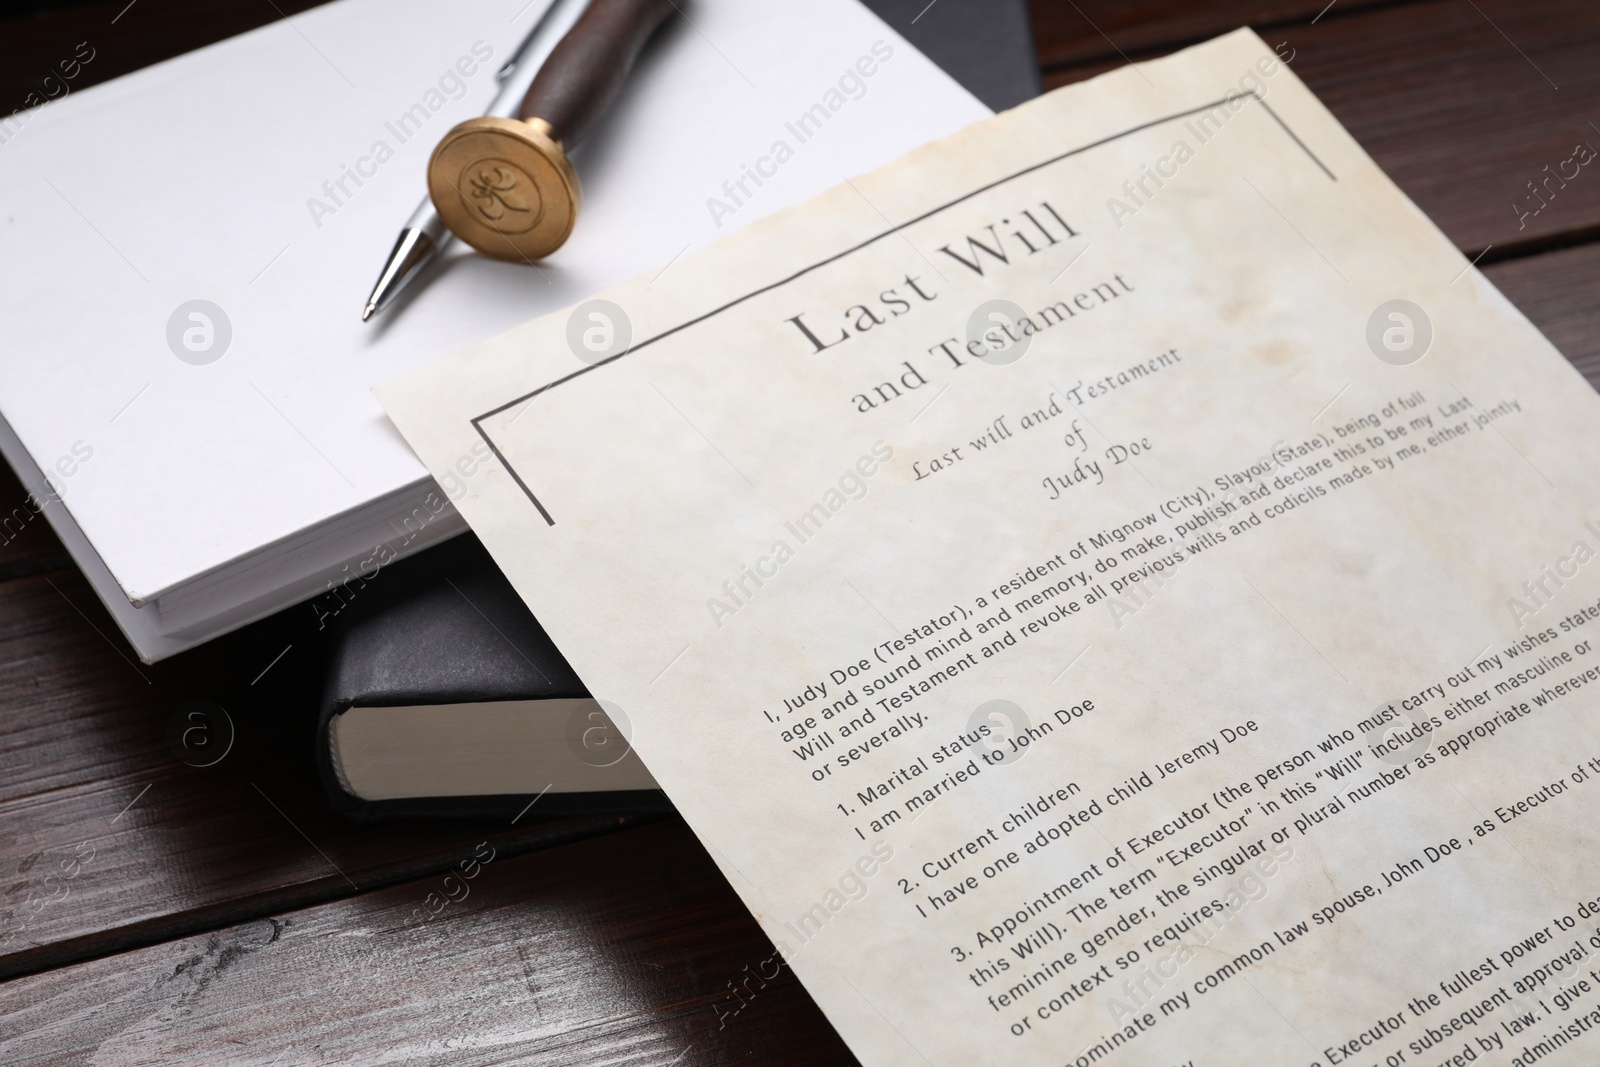 Photo of Last Will and Testament, books, stamp seal and pen on wooden table, closeup